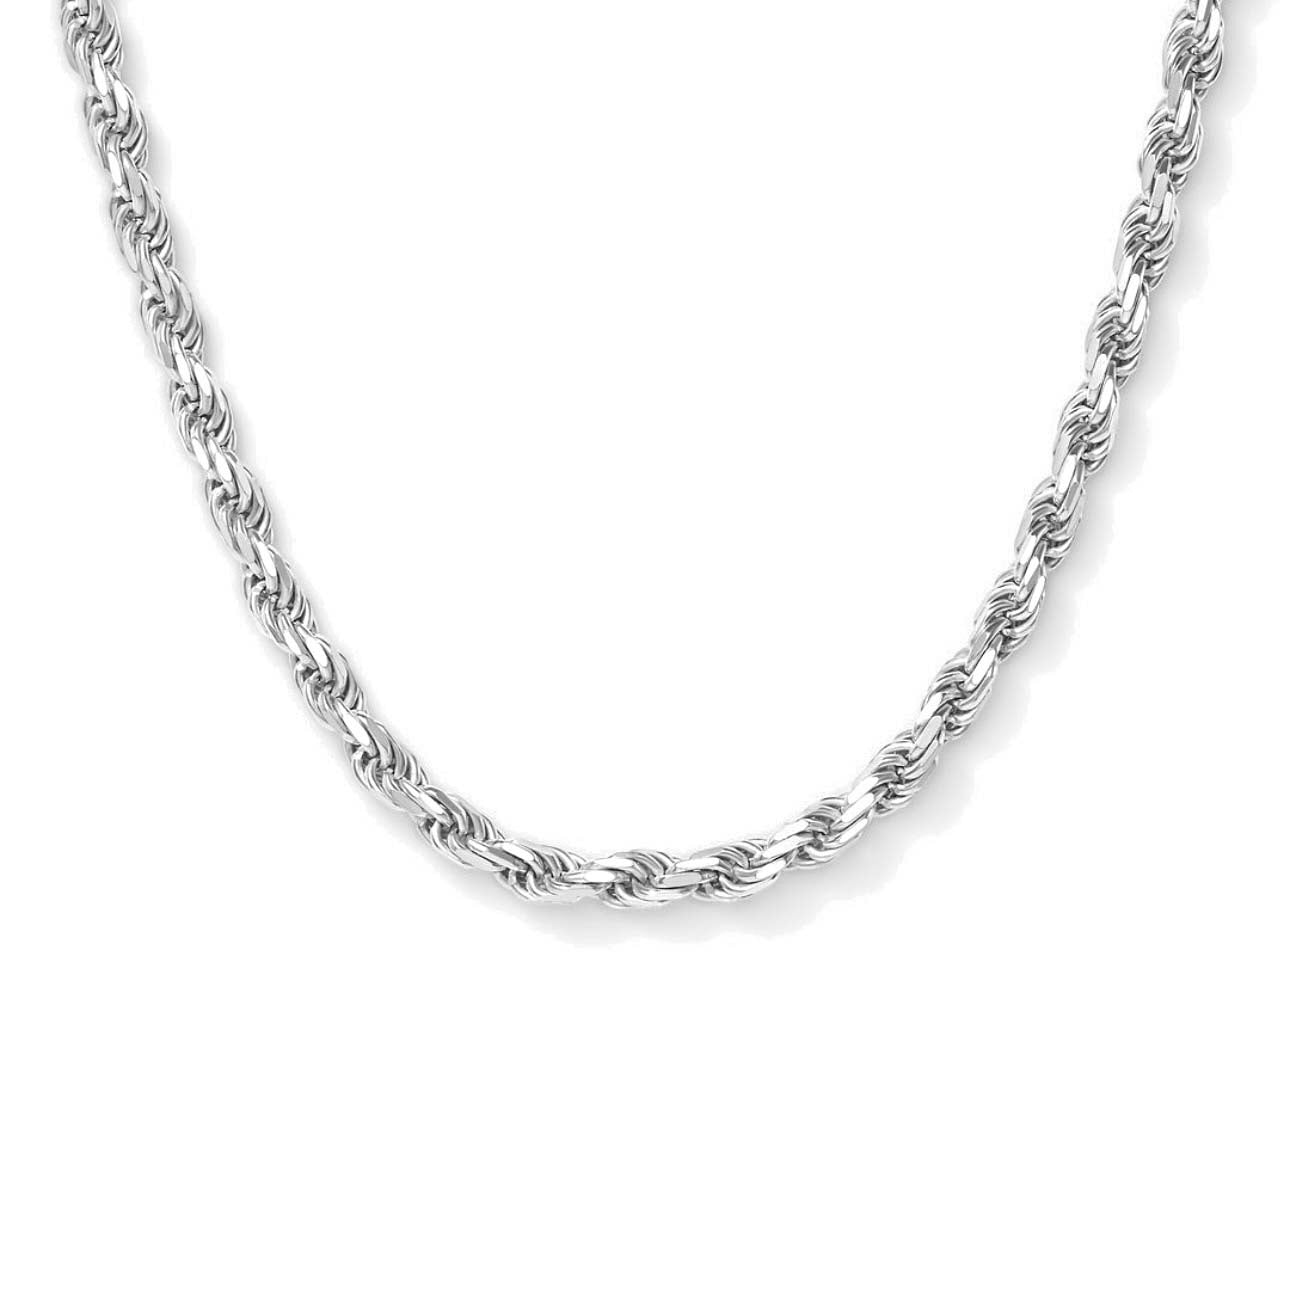 ROPE CHAIN 4MM